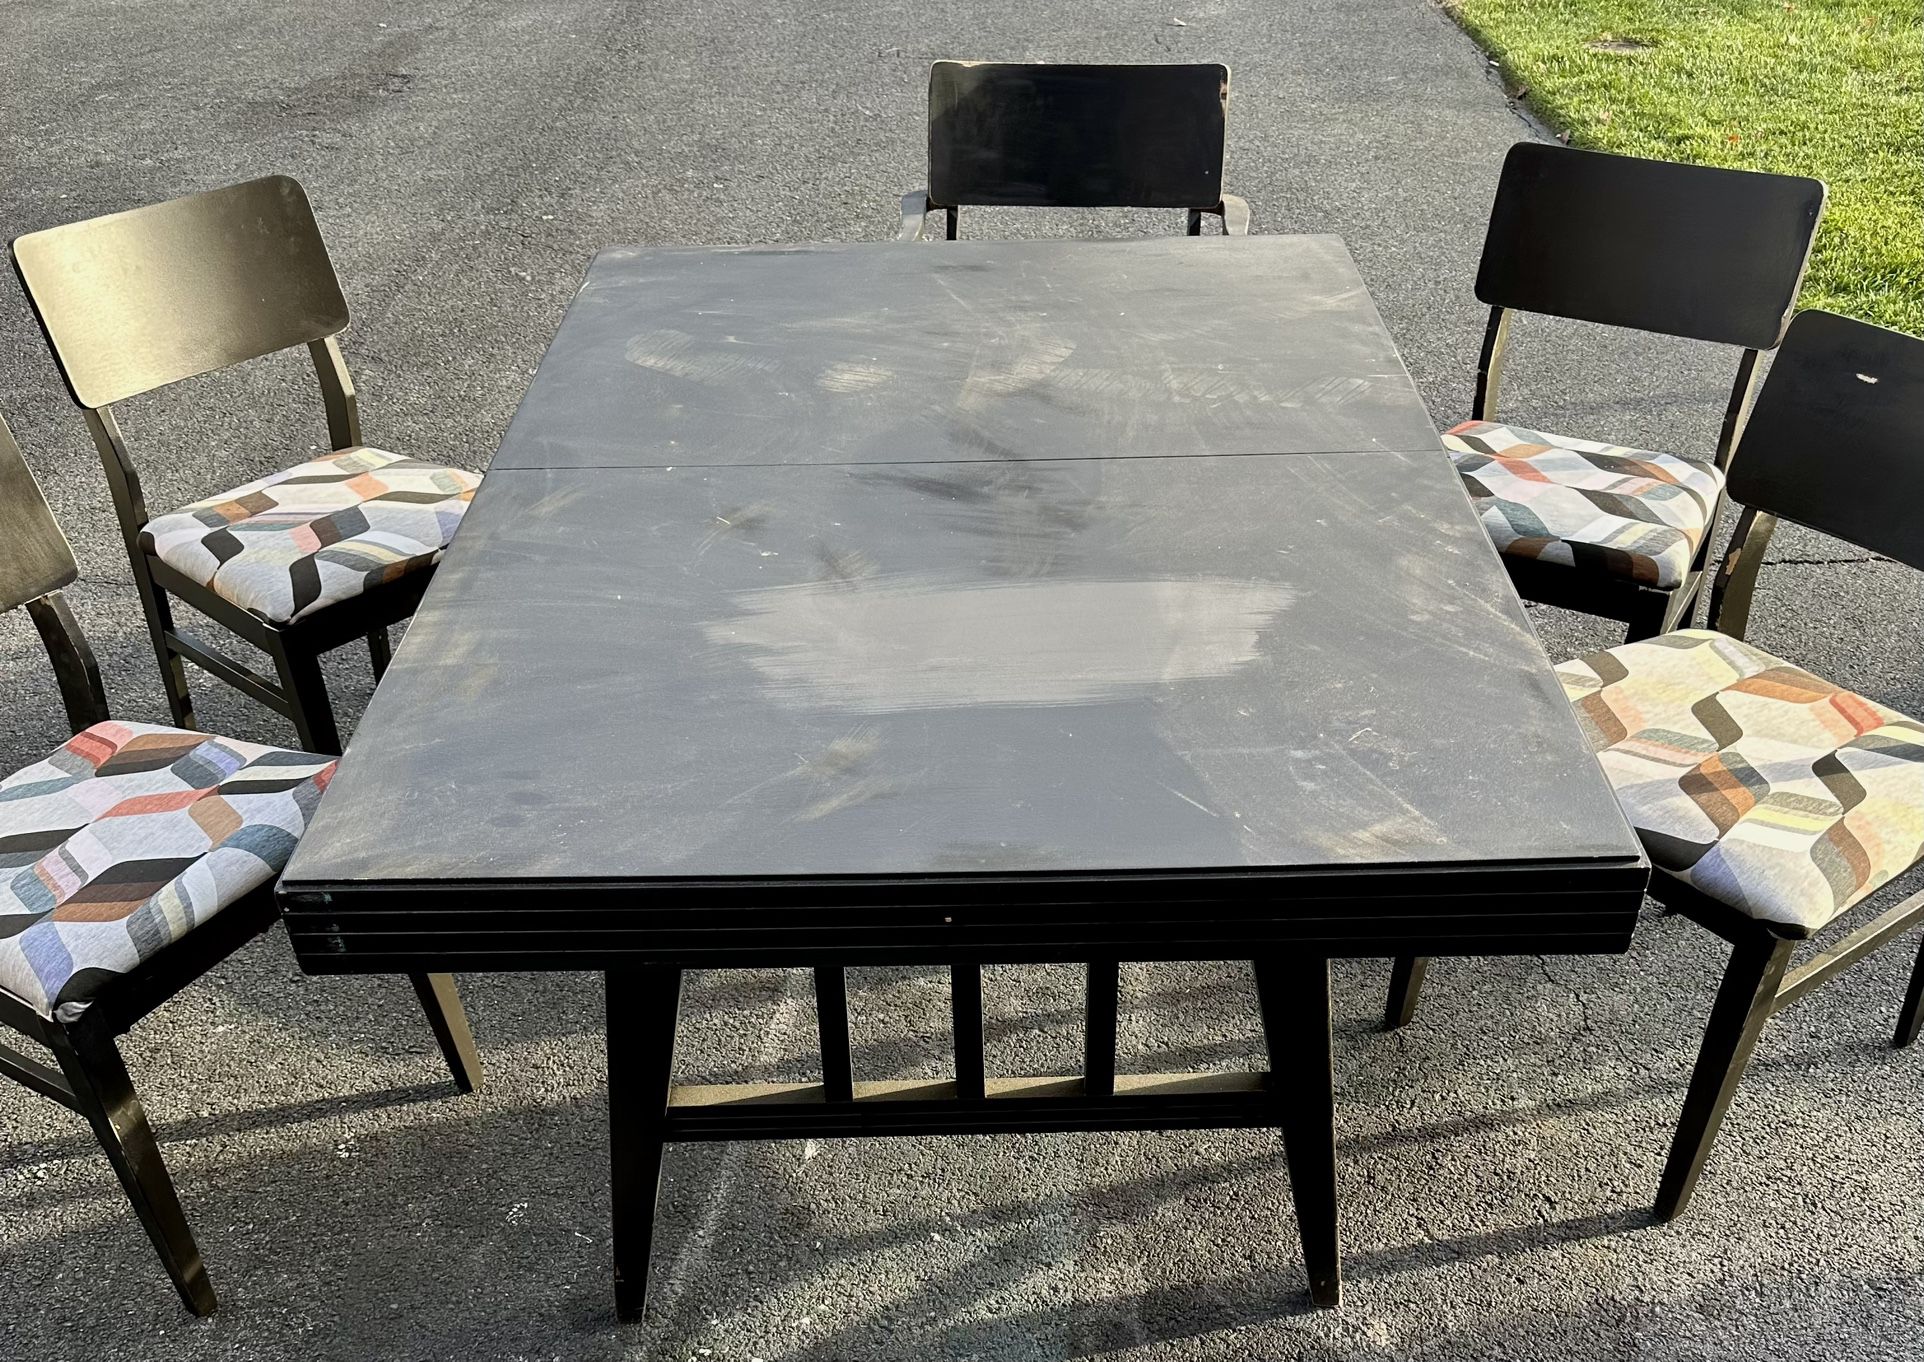 Selling As Is.    Table And 5 Chairs